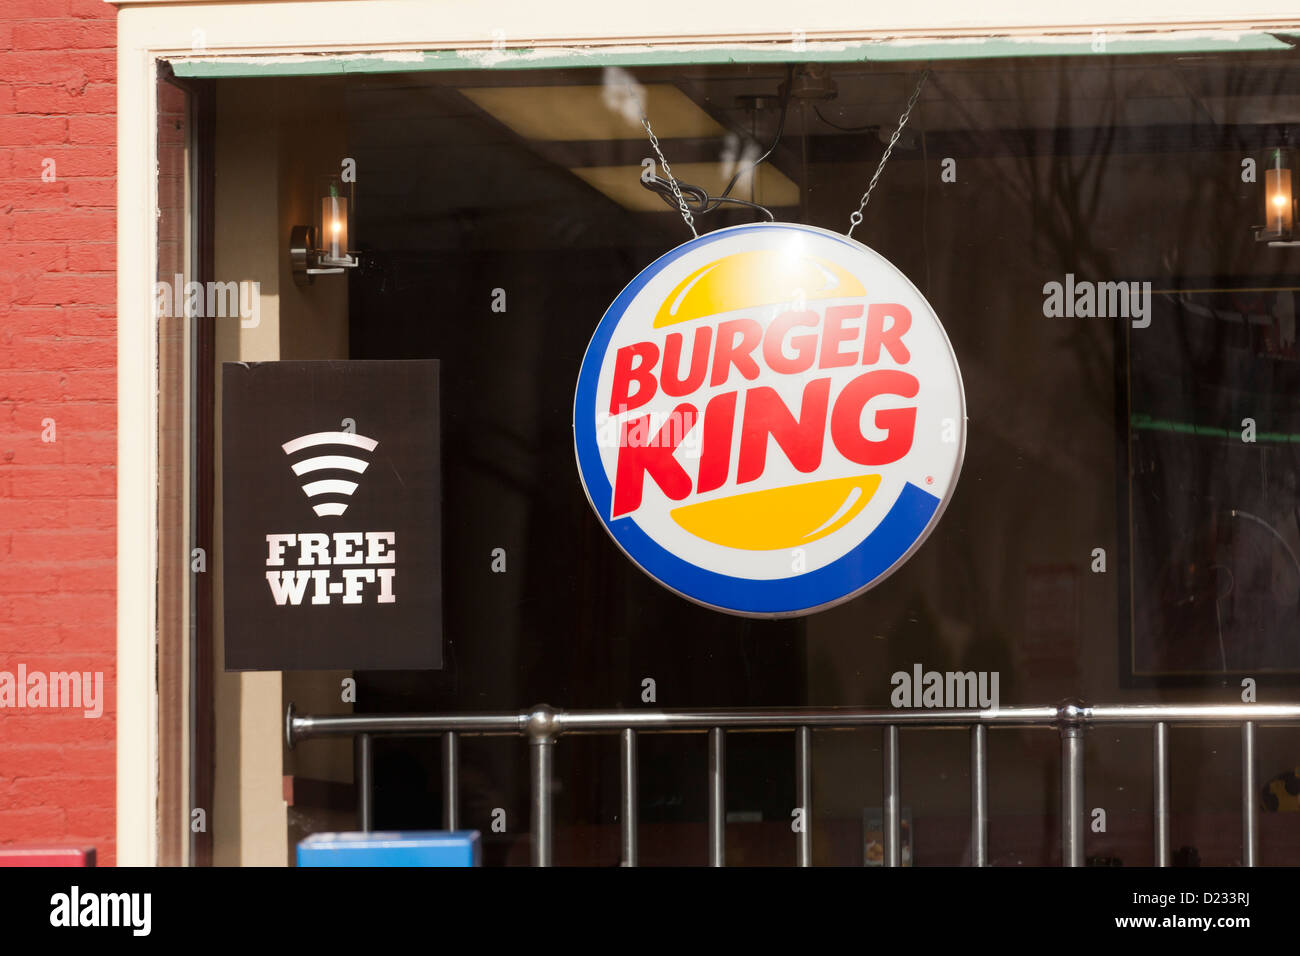 Burger King restaurant window with free WiFi service sign Stock Photo